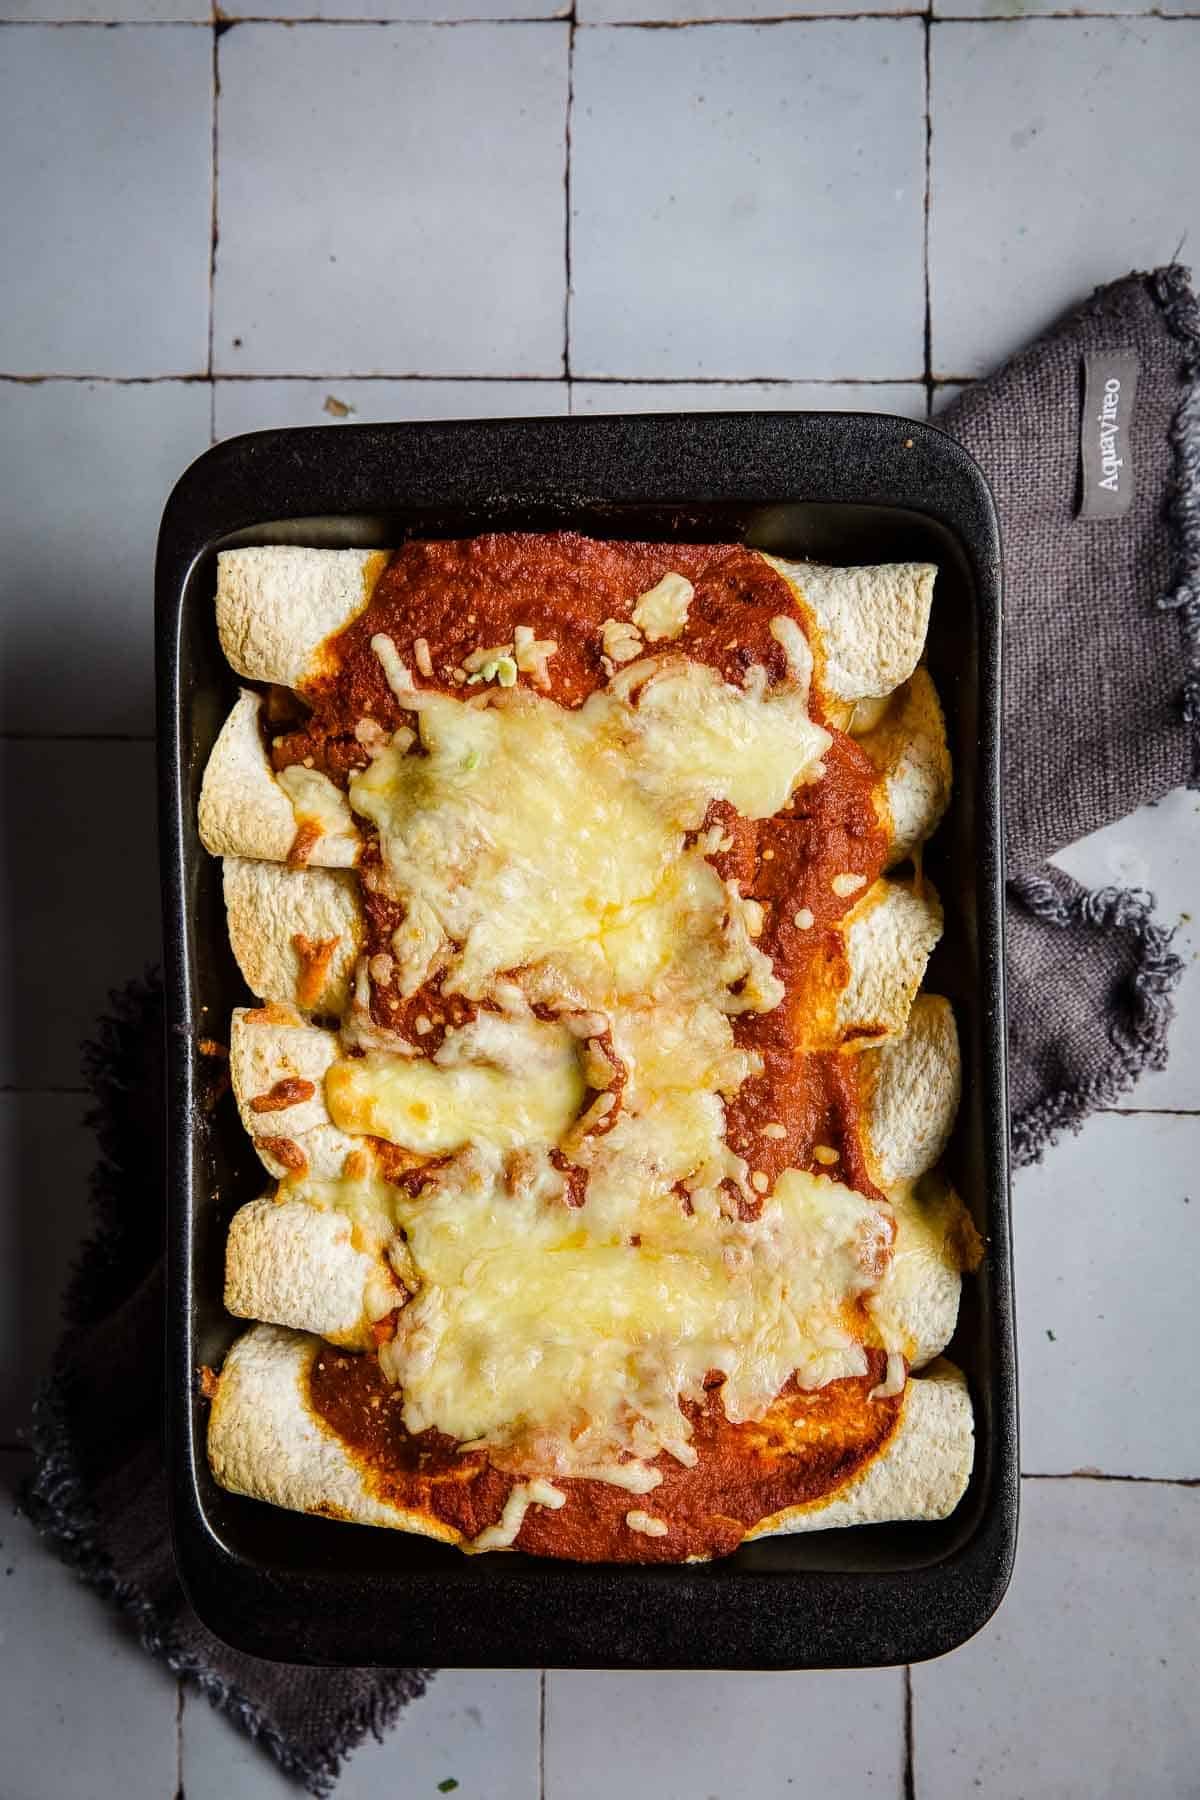 Keto Chicken Enchiladas in a black cast iron baking tray with cheese and sauce on top.